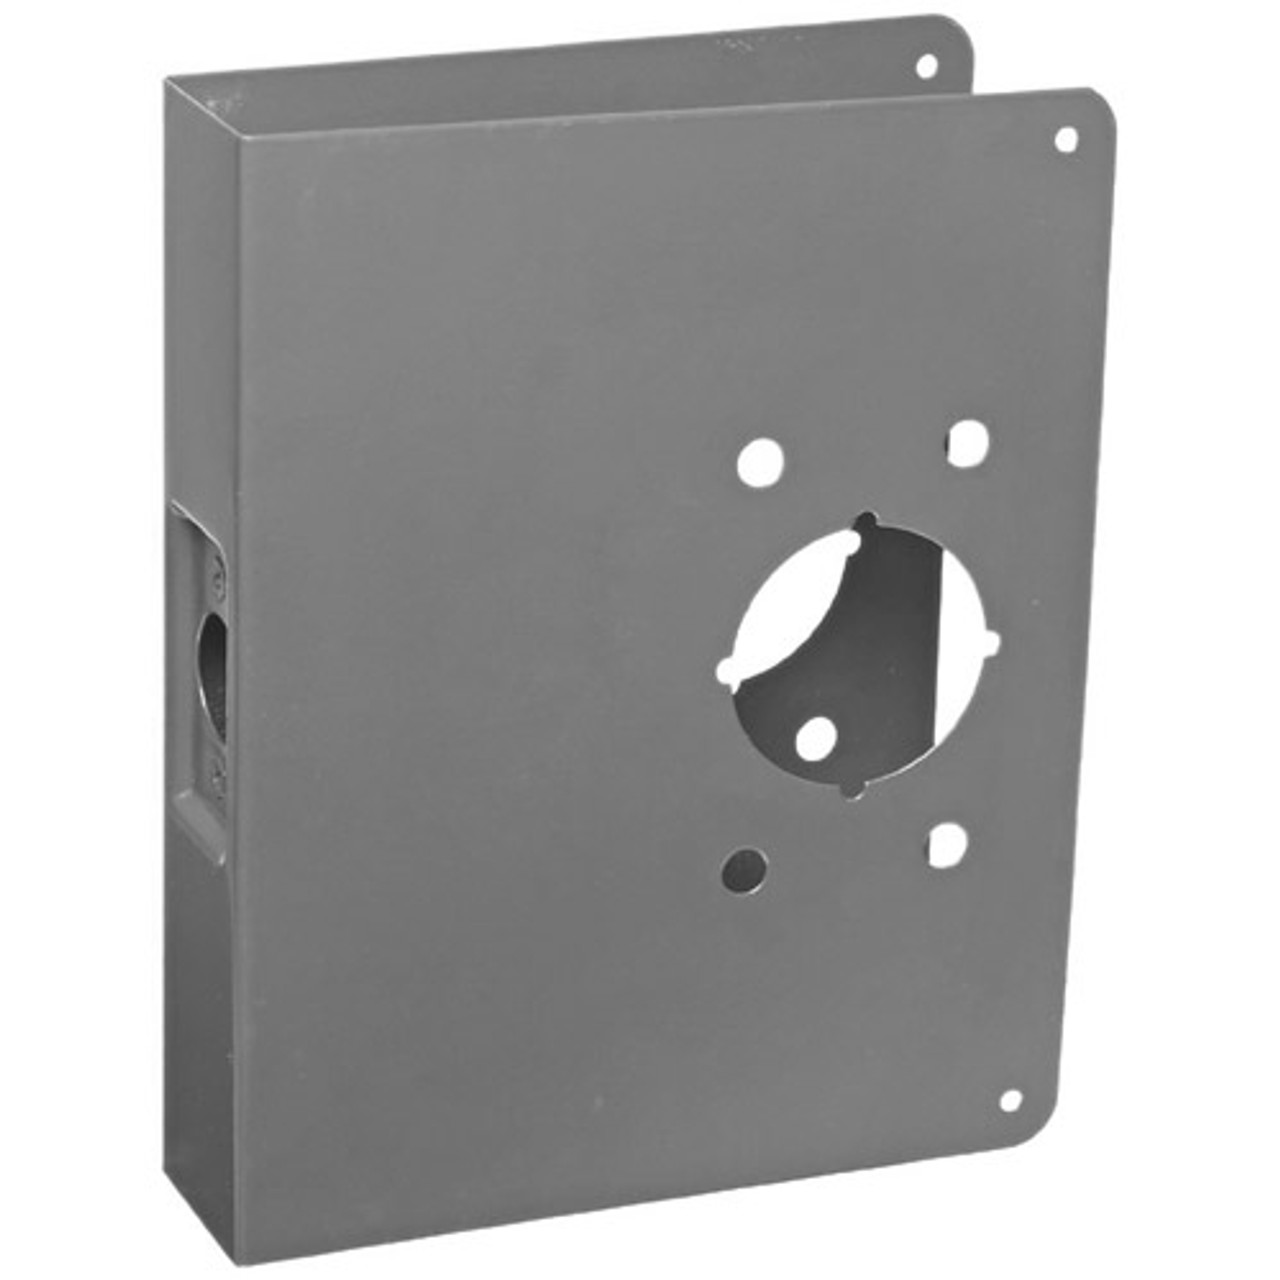 4U-2-S-CW Don Jo Blank Wrap-Around Plate in Stainless Steel Finish